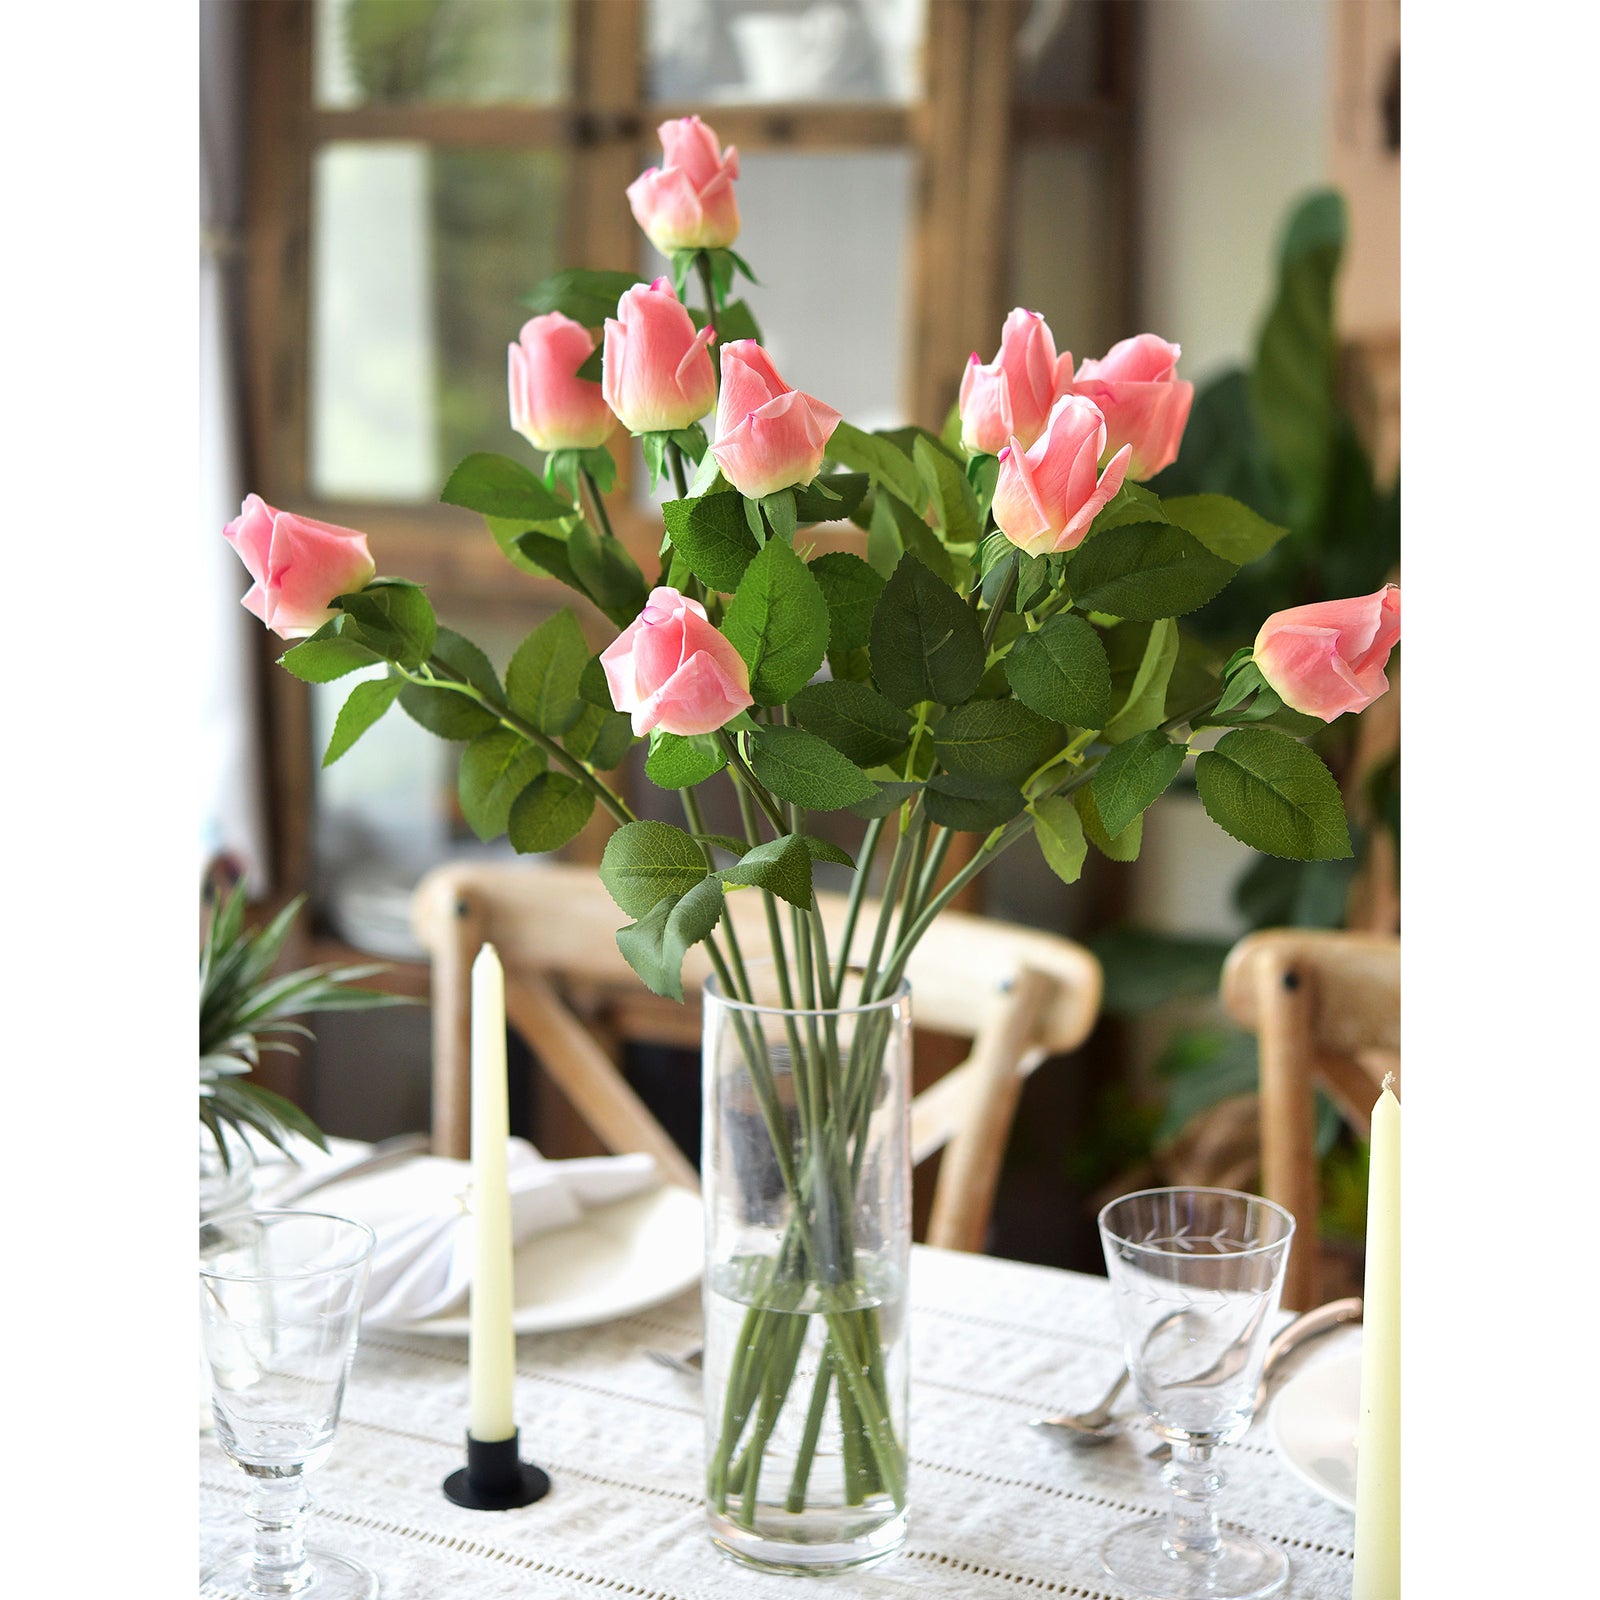 Flamingo Wild Pink Long Stem 21 inches Roses Real Touch Silk Artificial Flowers 12 Stems